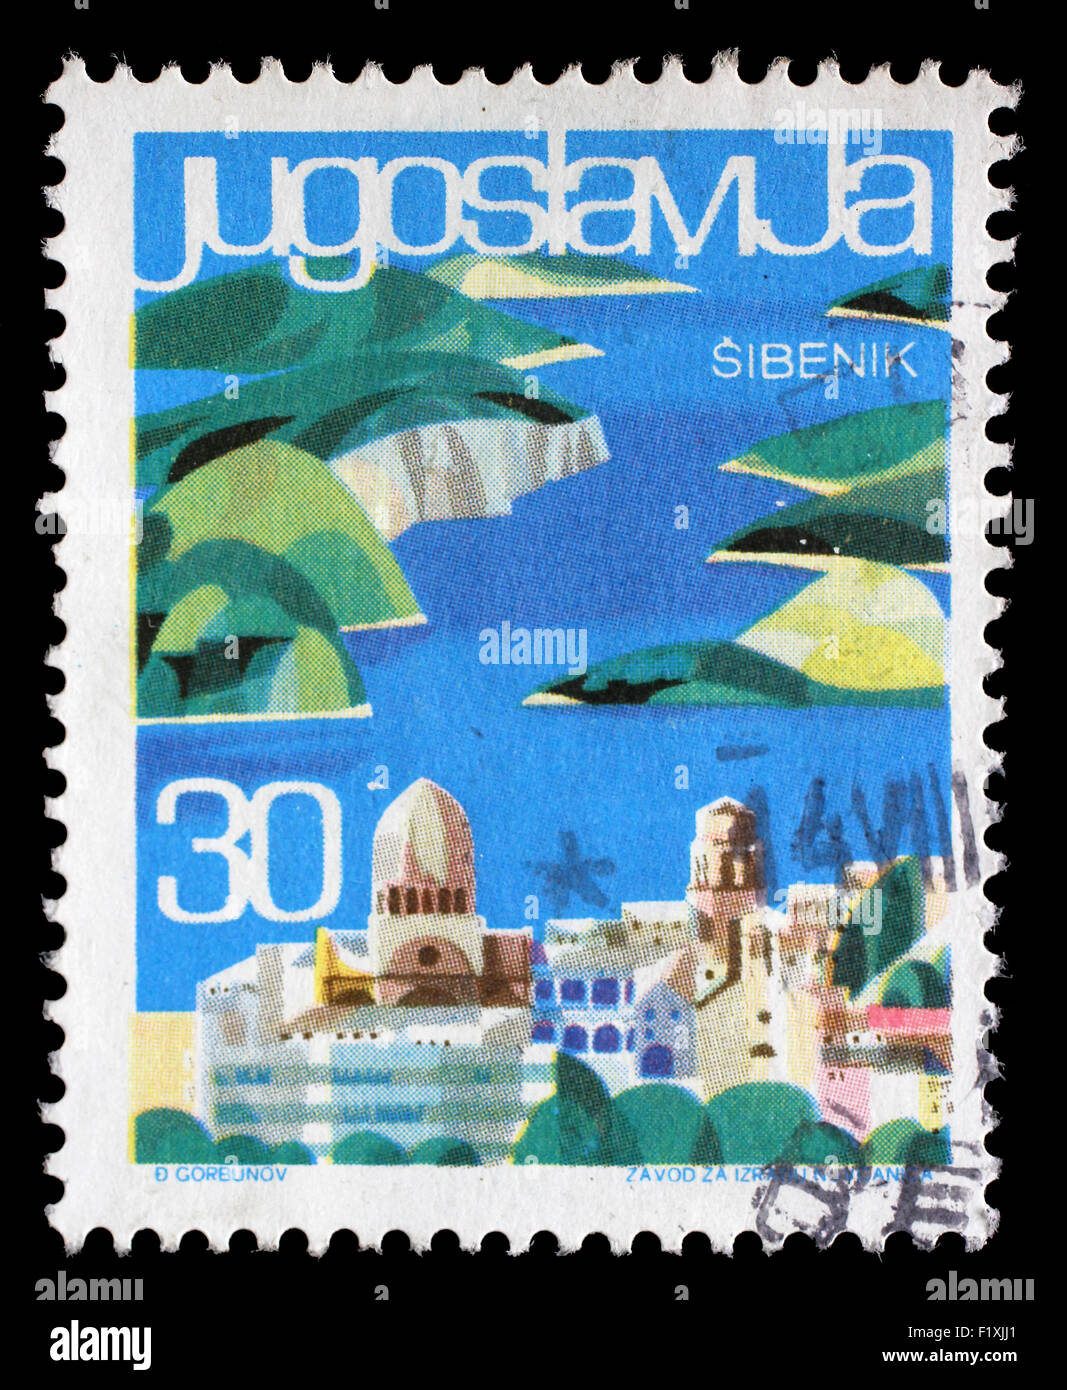 Stamp printed in Yugoslavia from the Local Tourism issue shows Sibenik, Croatia, circa 1963. Stock Photo